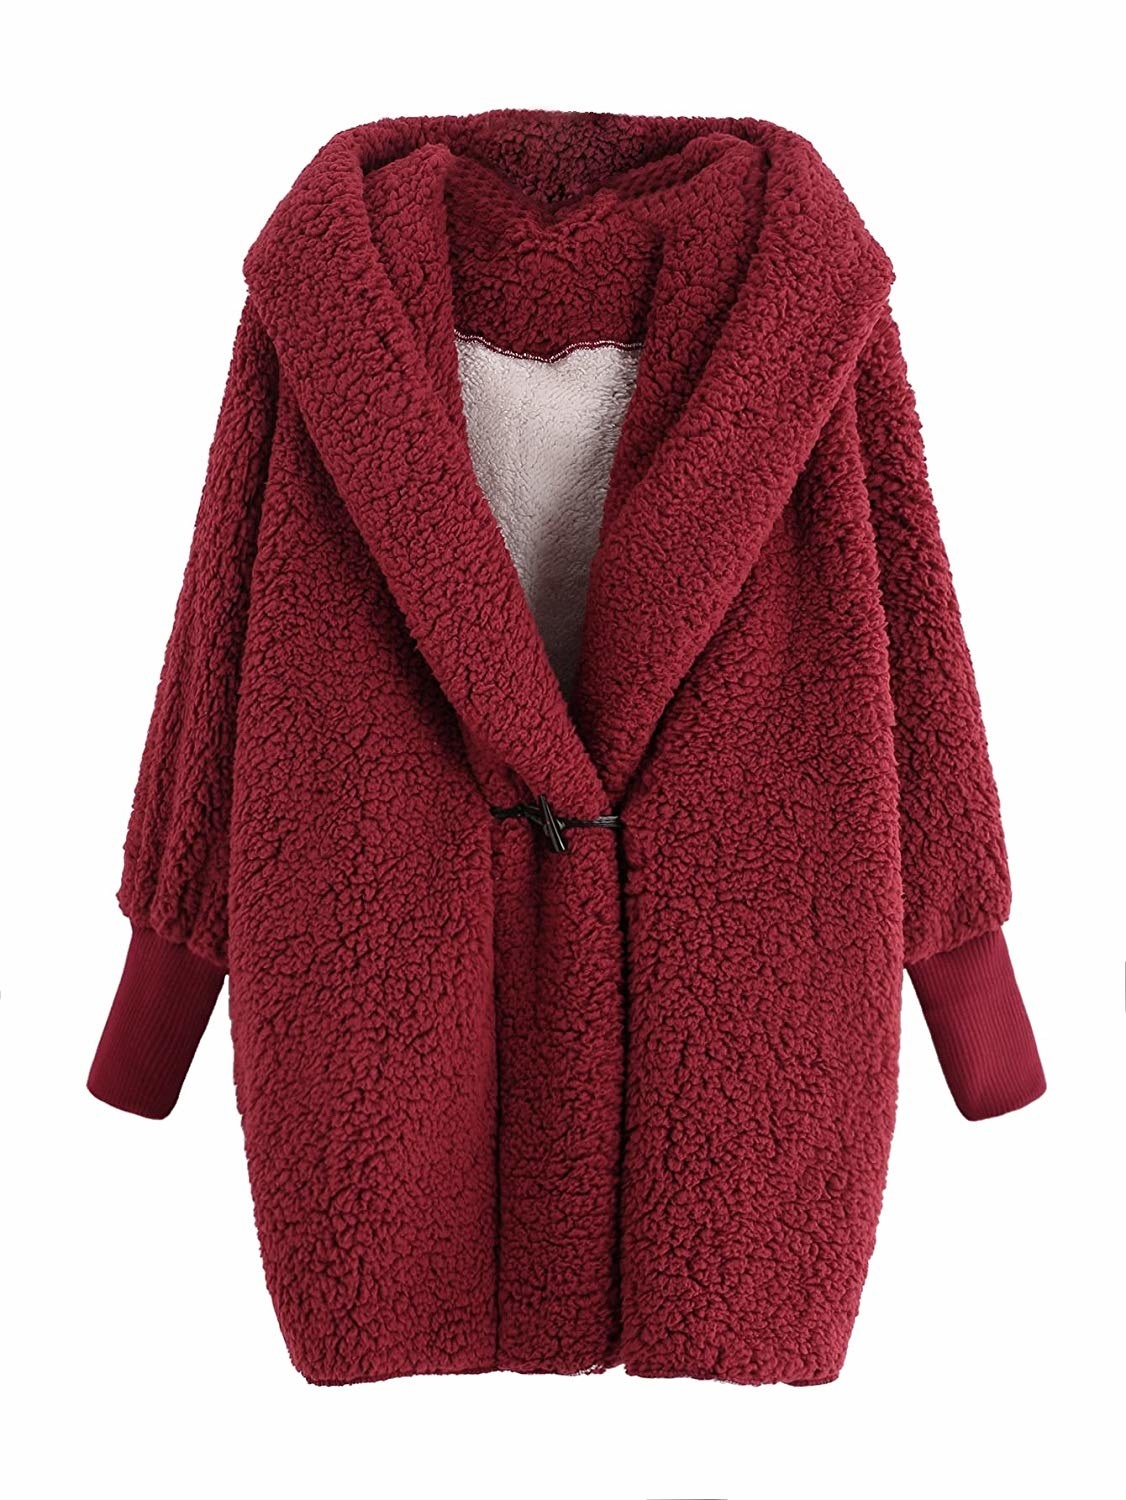 28 Cuddle-Worthy Things You'll Want To Curl Up With Right Now